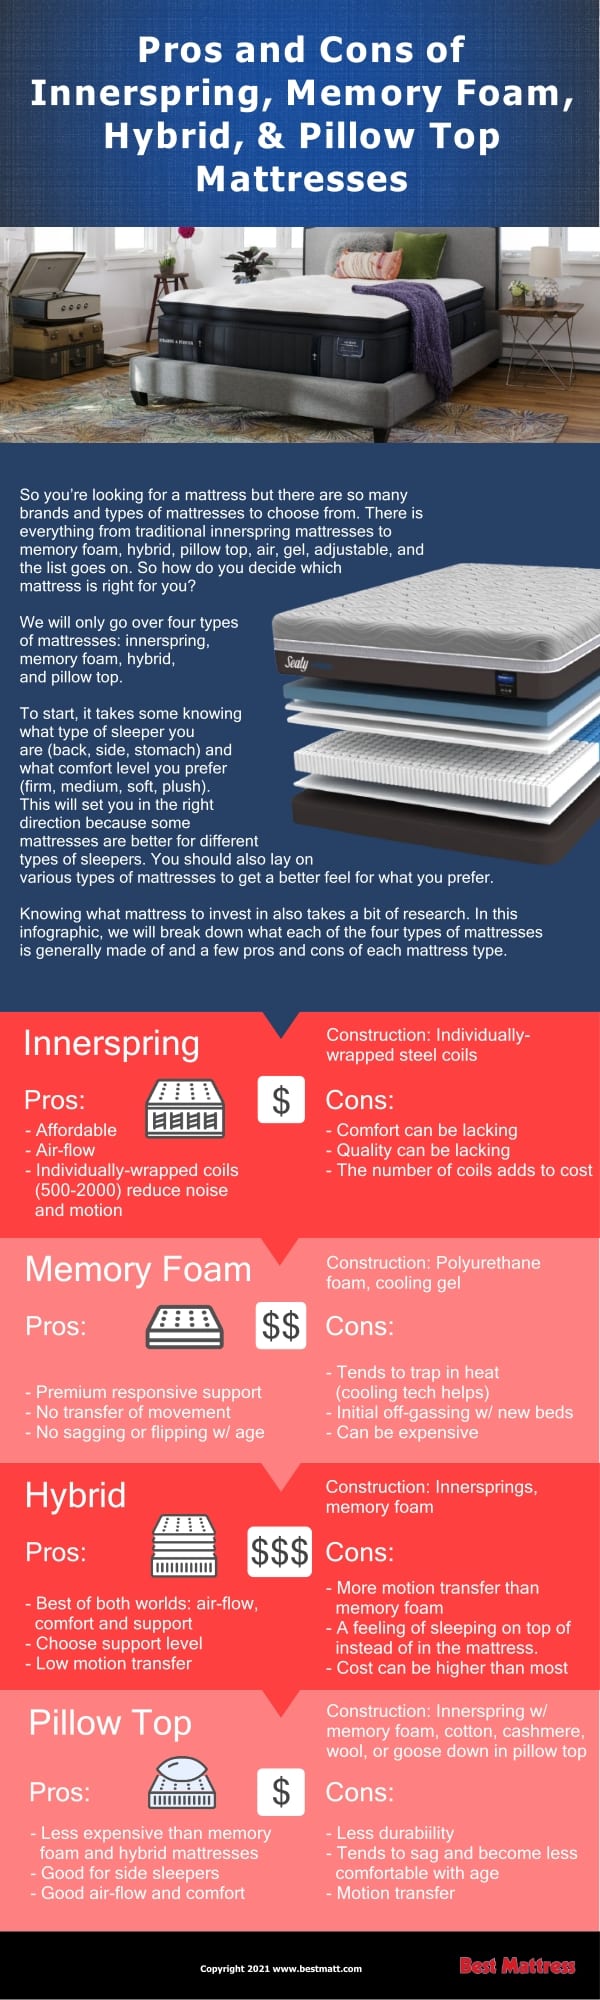 Pros And Cons Of Comparable Mattresses